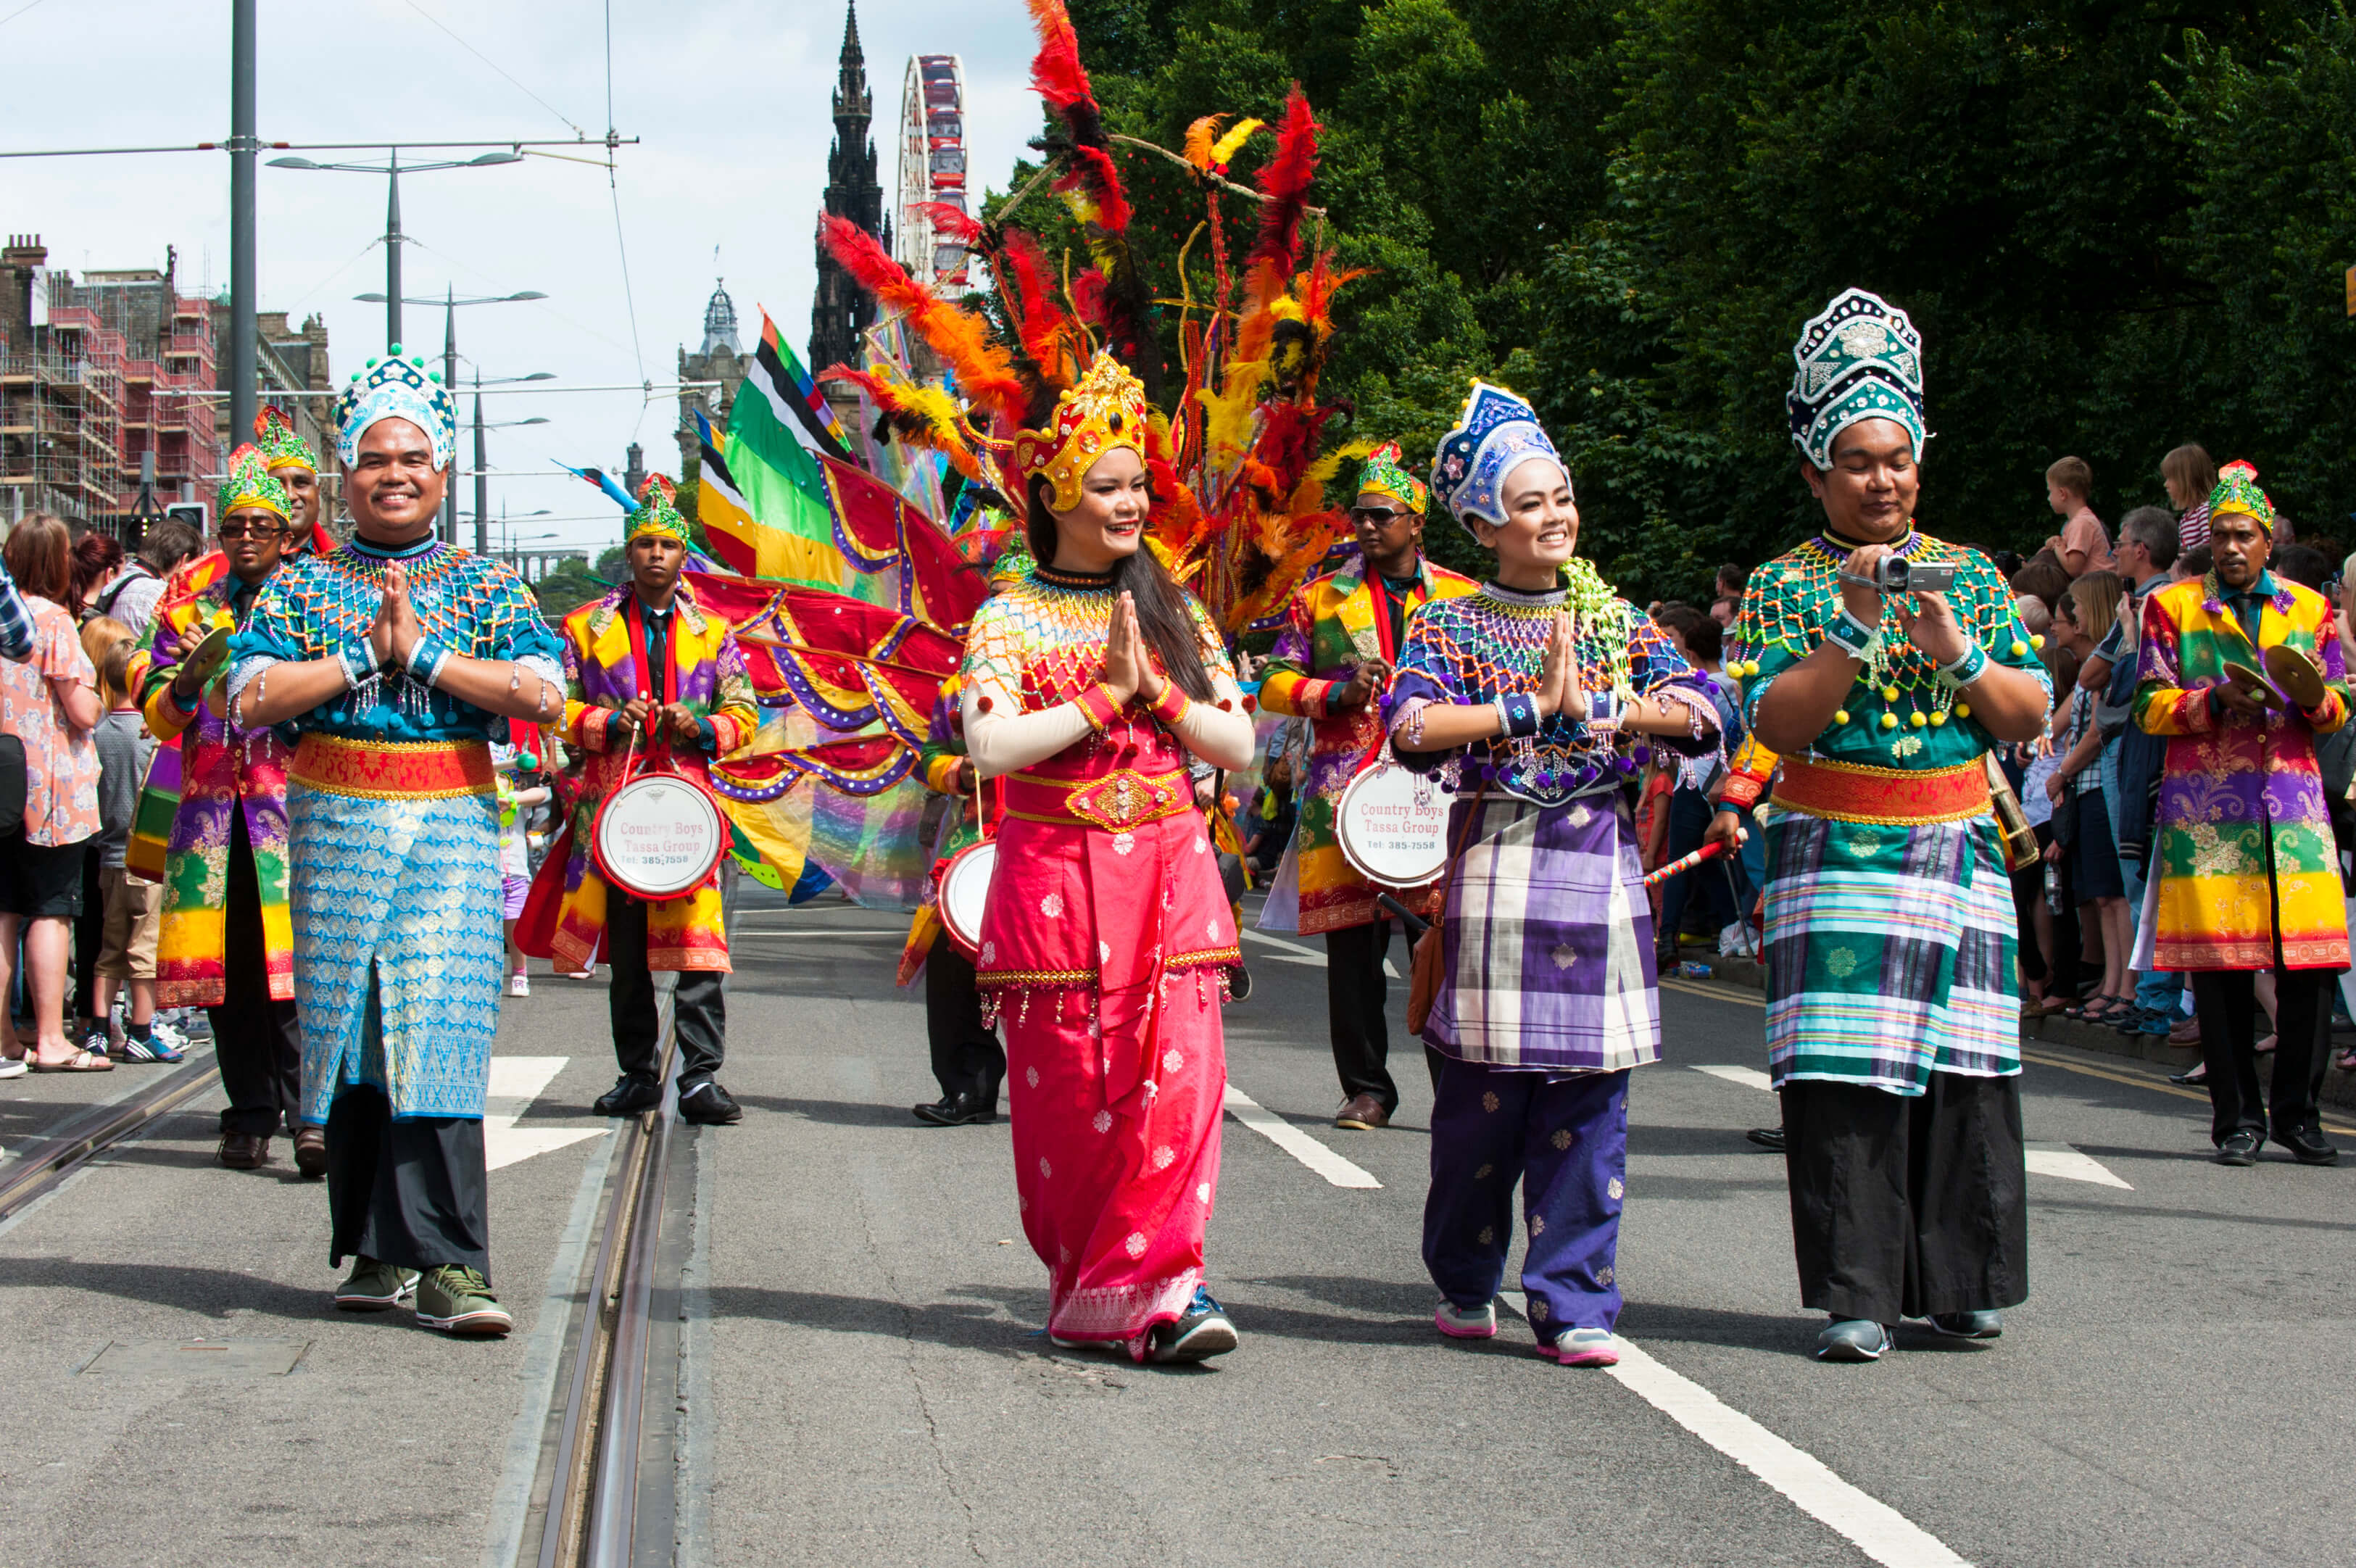 Performers taking part in the Carnival parade